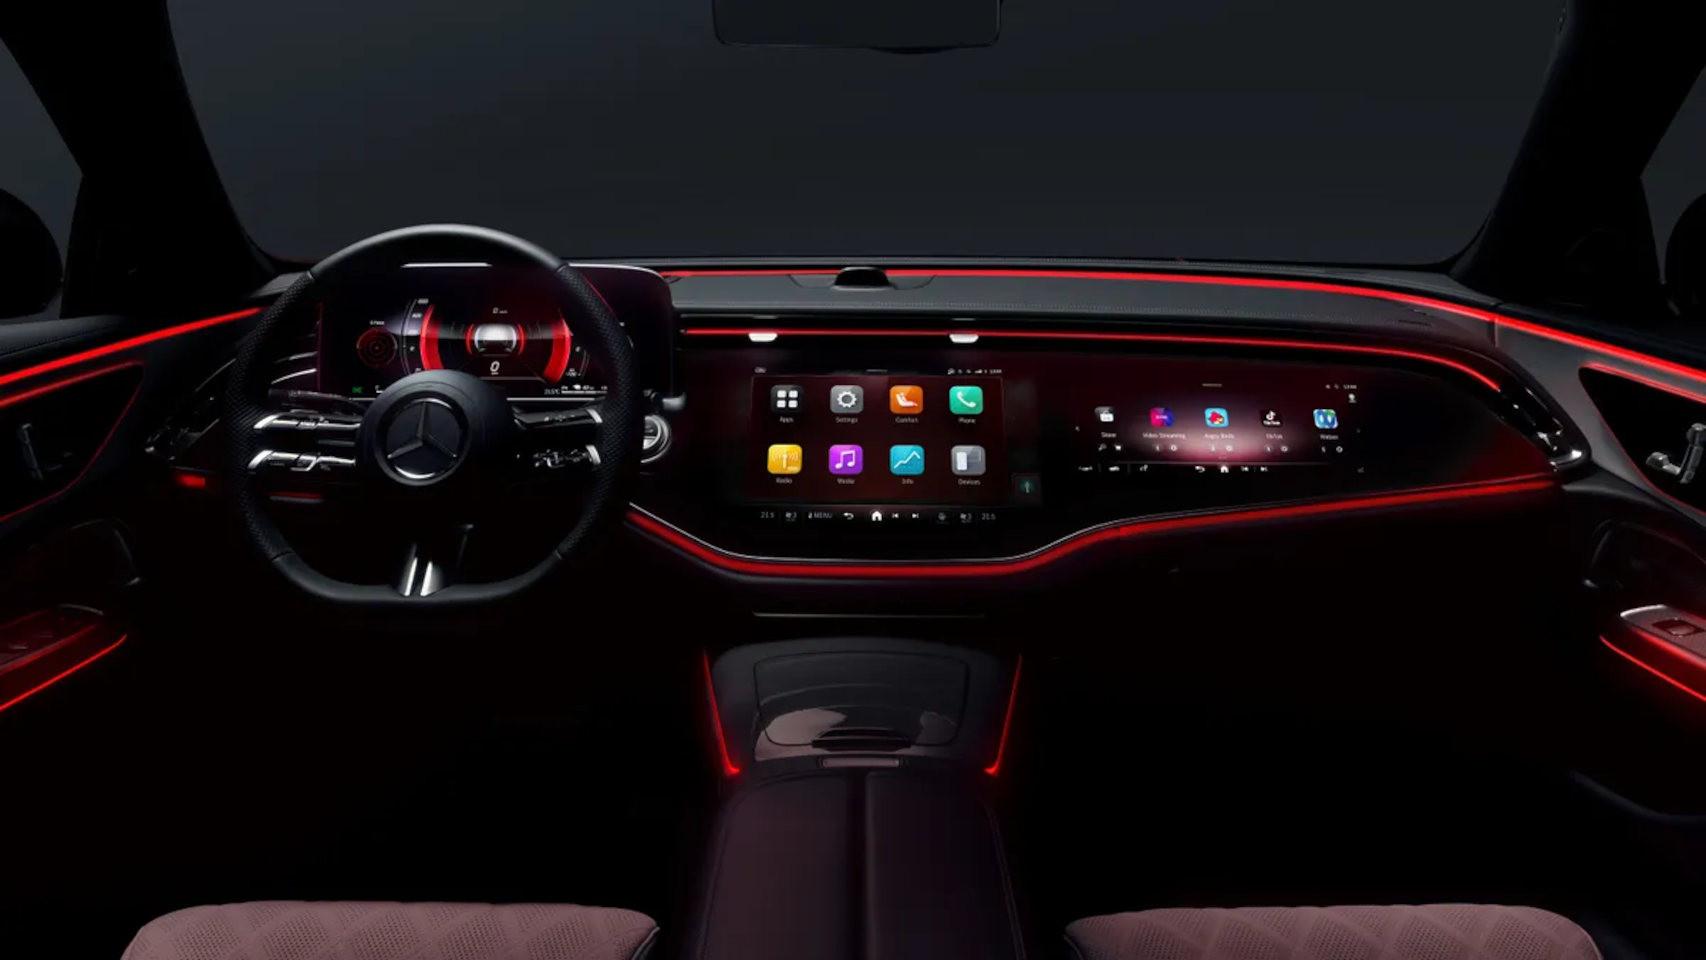 The interior of the new Mercedes-Benz E-Class is full of screens